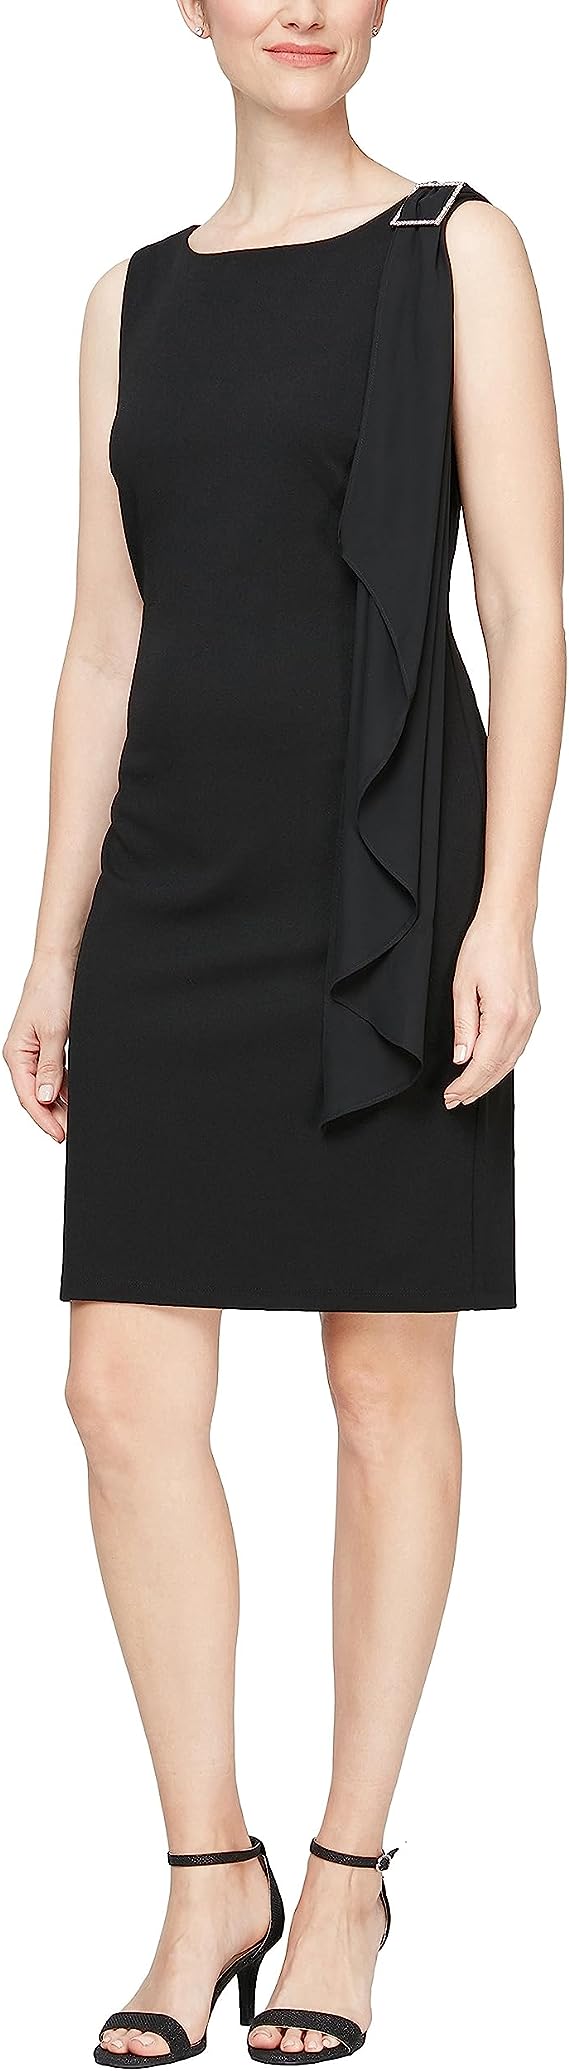 Crepe Chemise Dress with Buckle Broach | Black